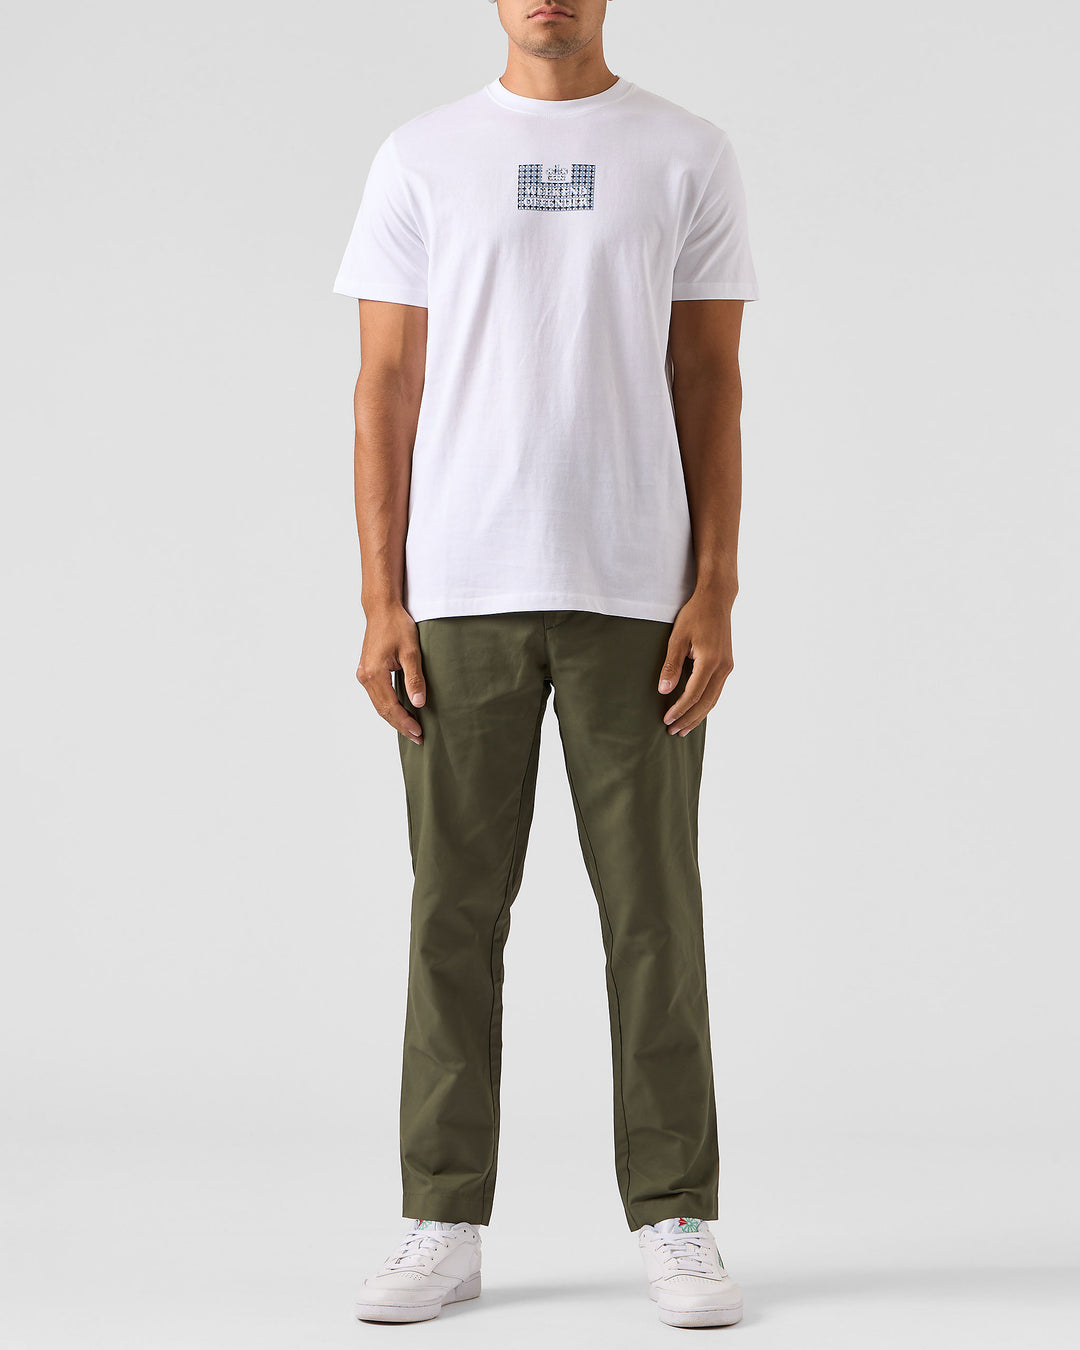 Weekend Offender Dygas T-Shirt-White/Blue House Check